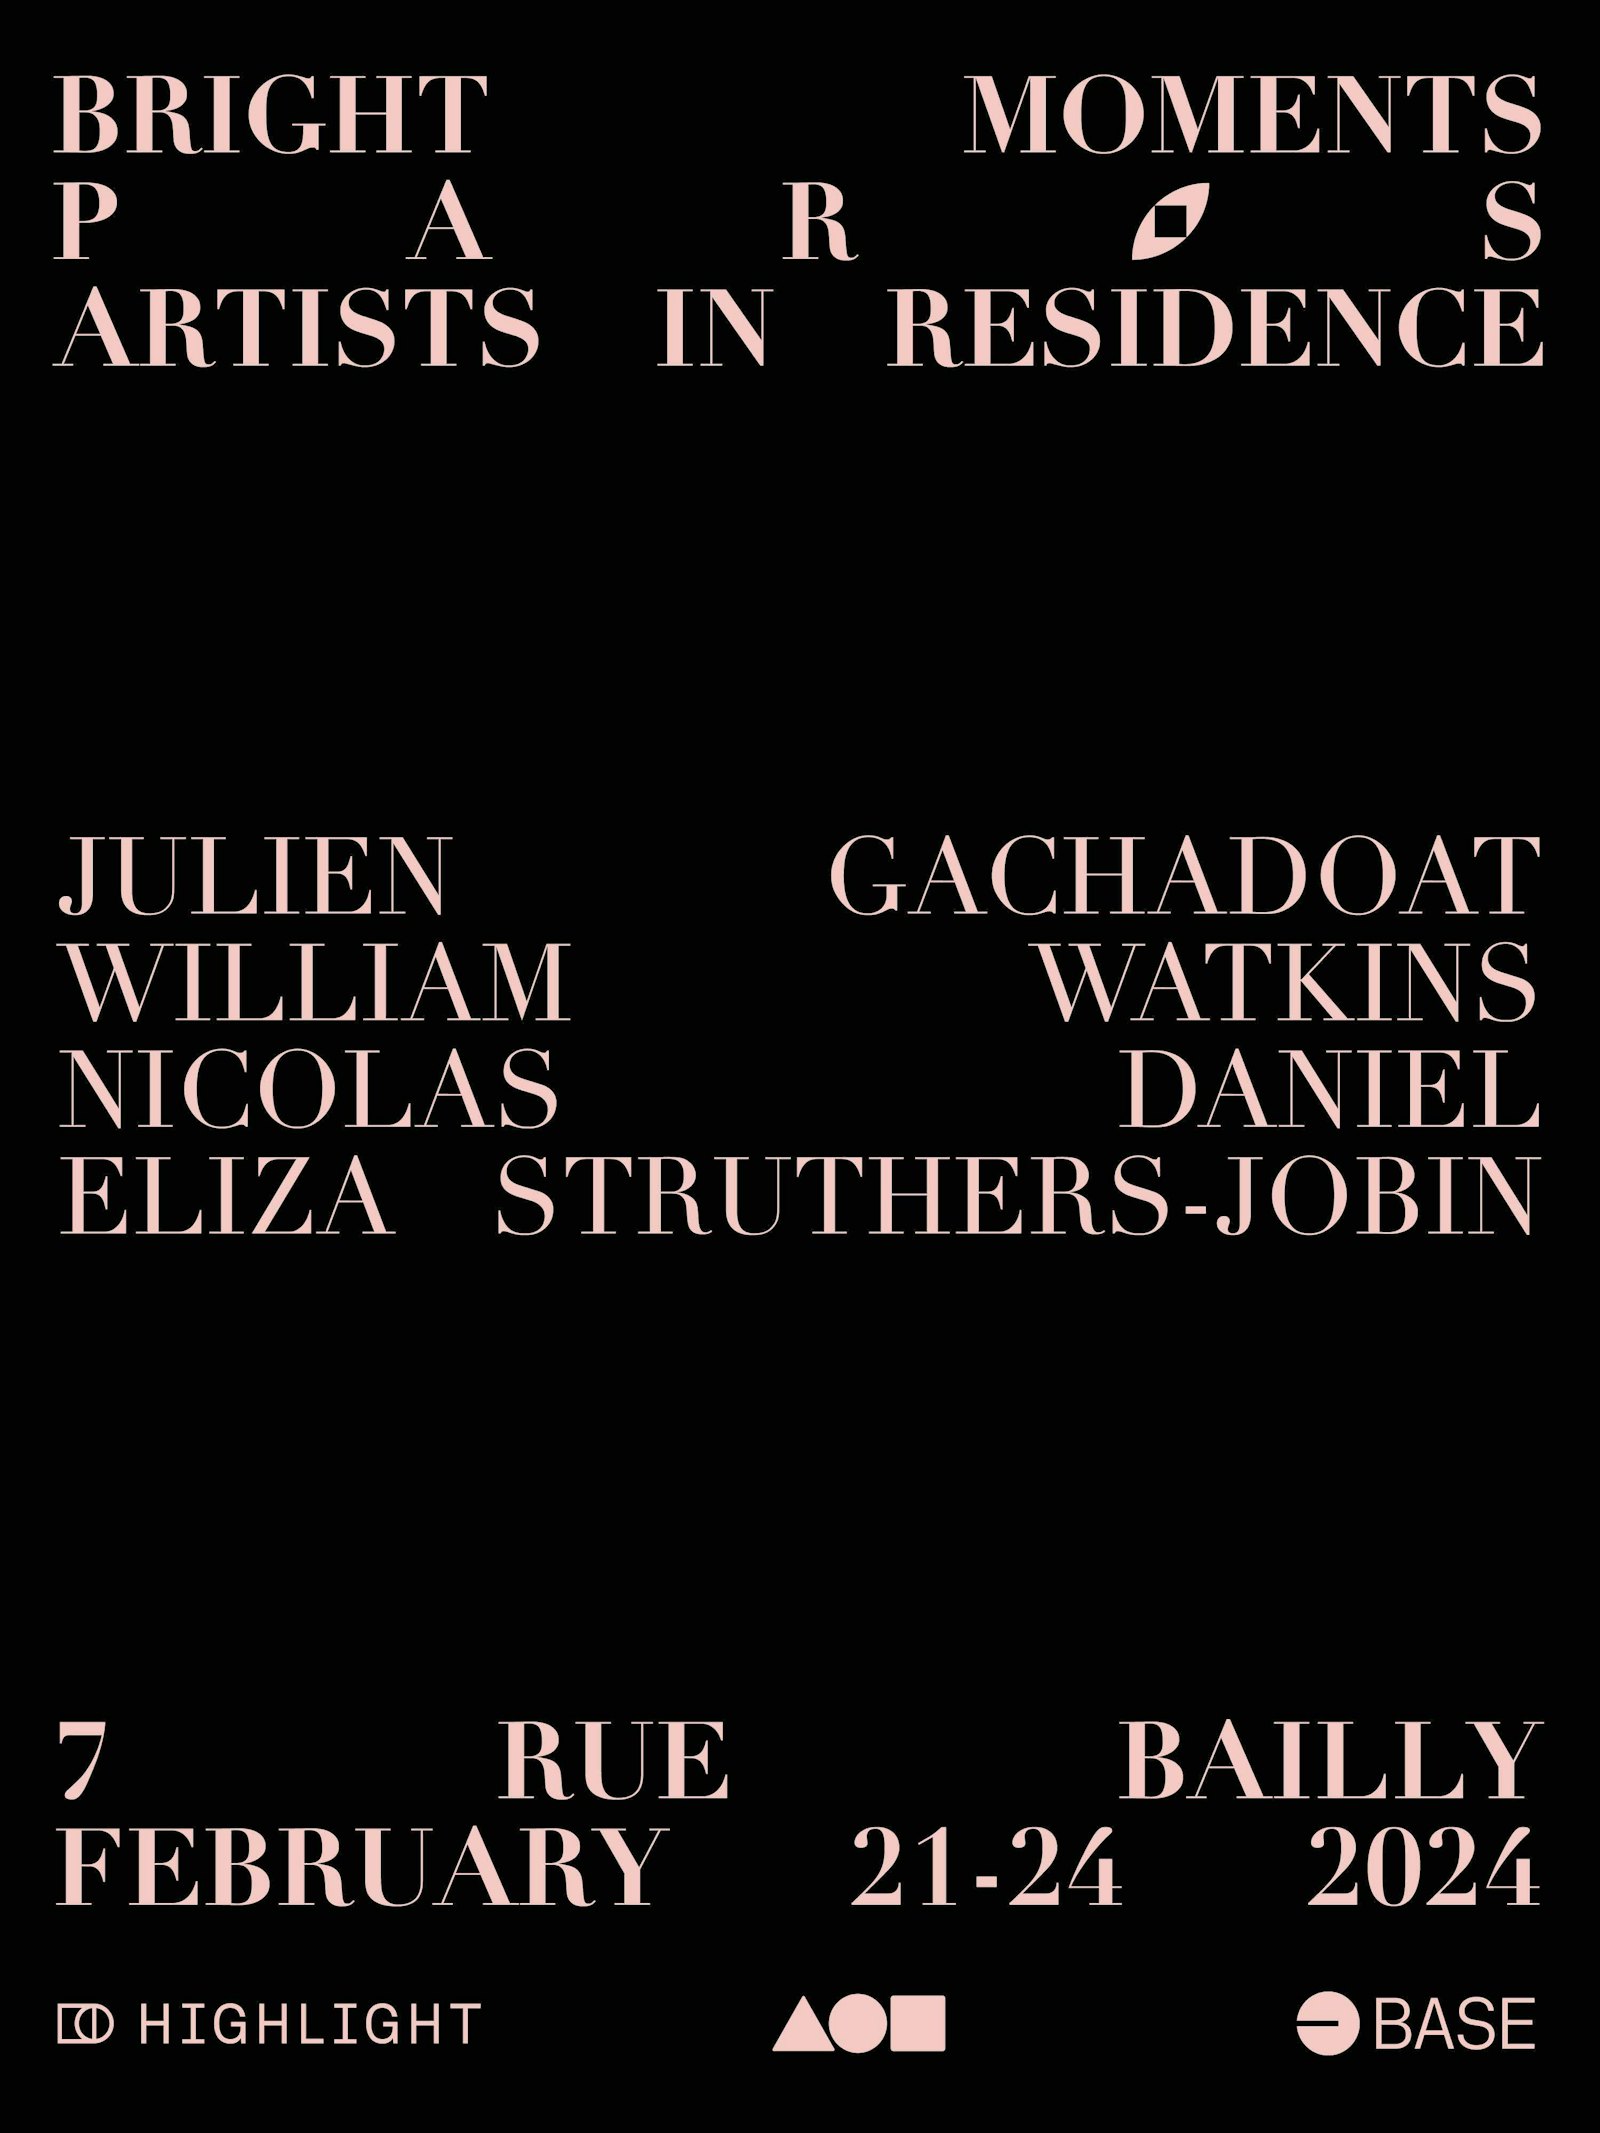 Bright Moments Paris Artists In Residence